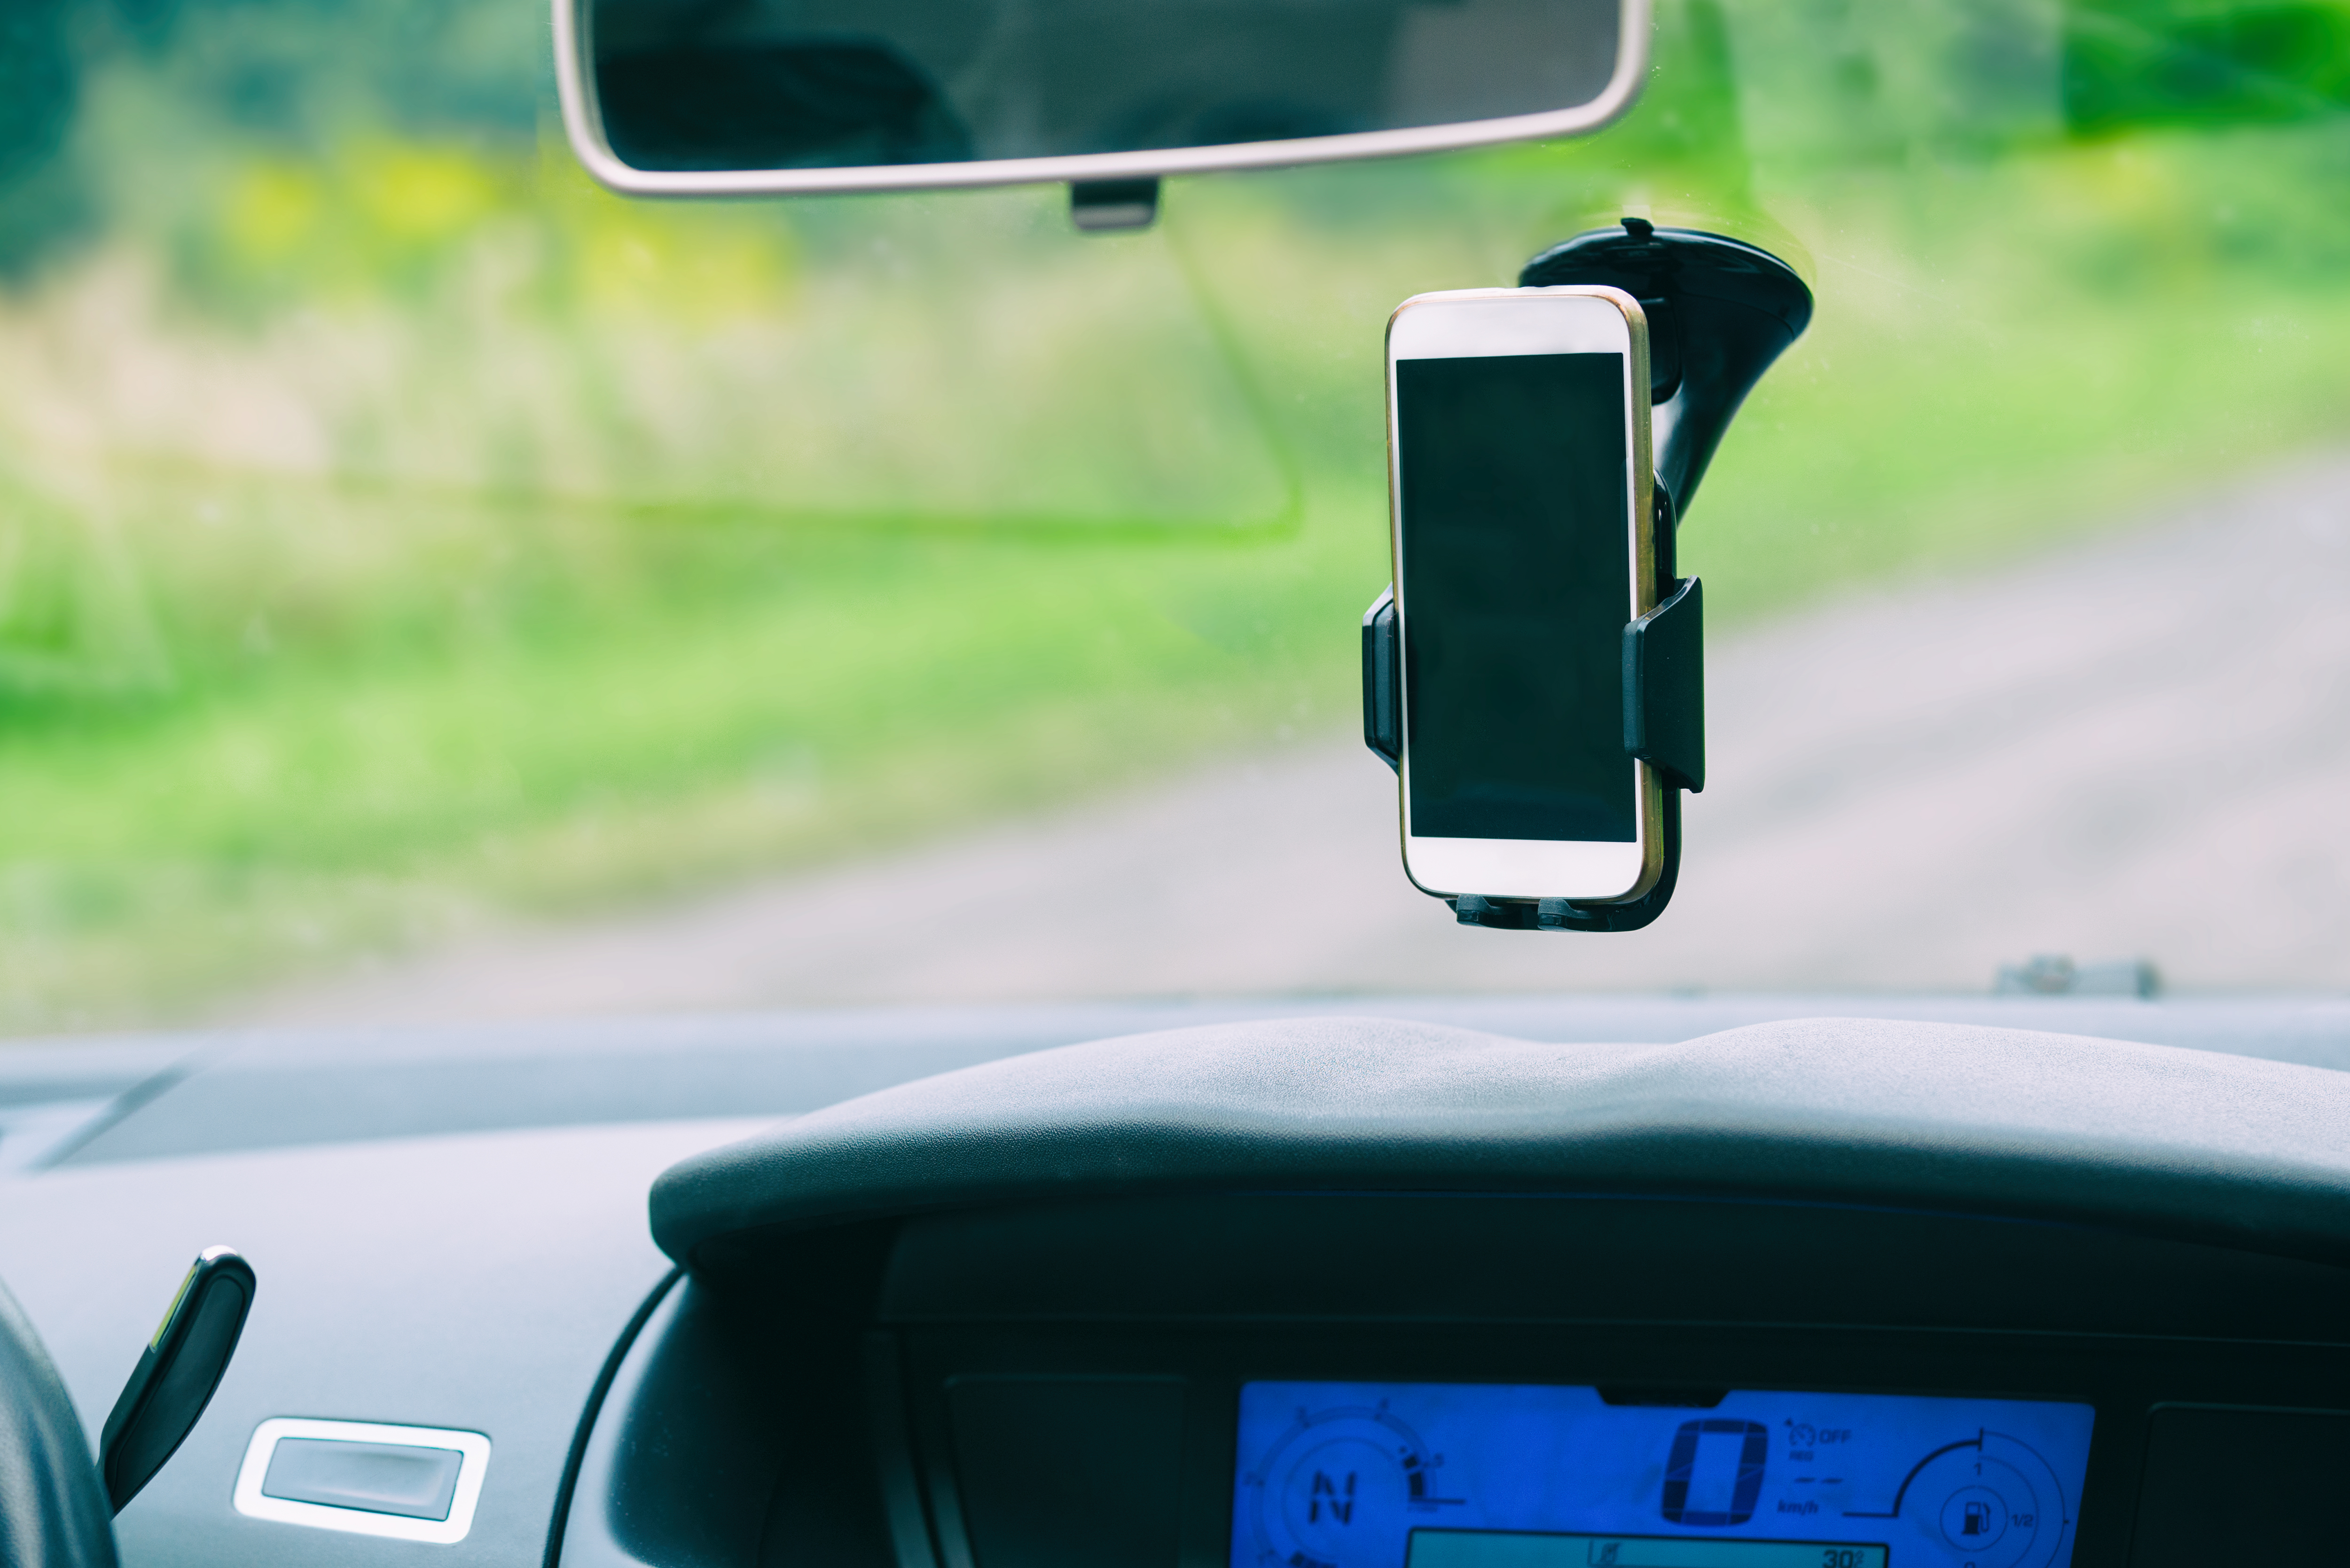 Many drivers use phone holders or dashboard cameras attached to their windscreen